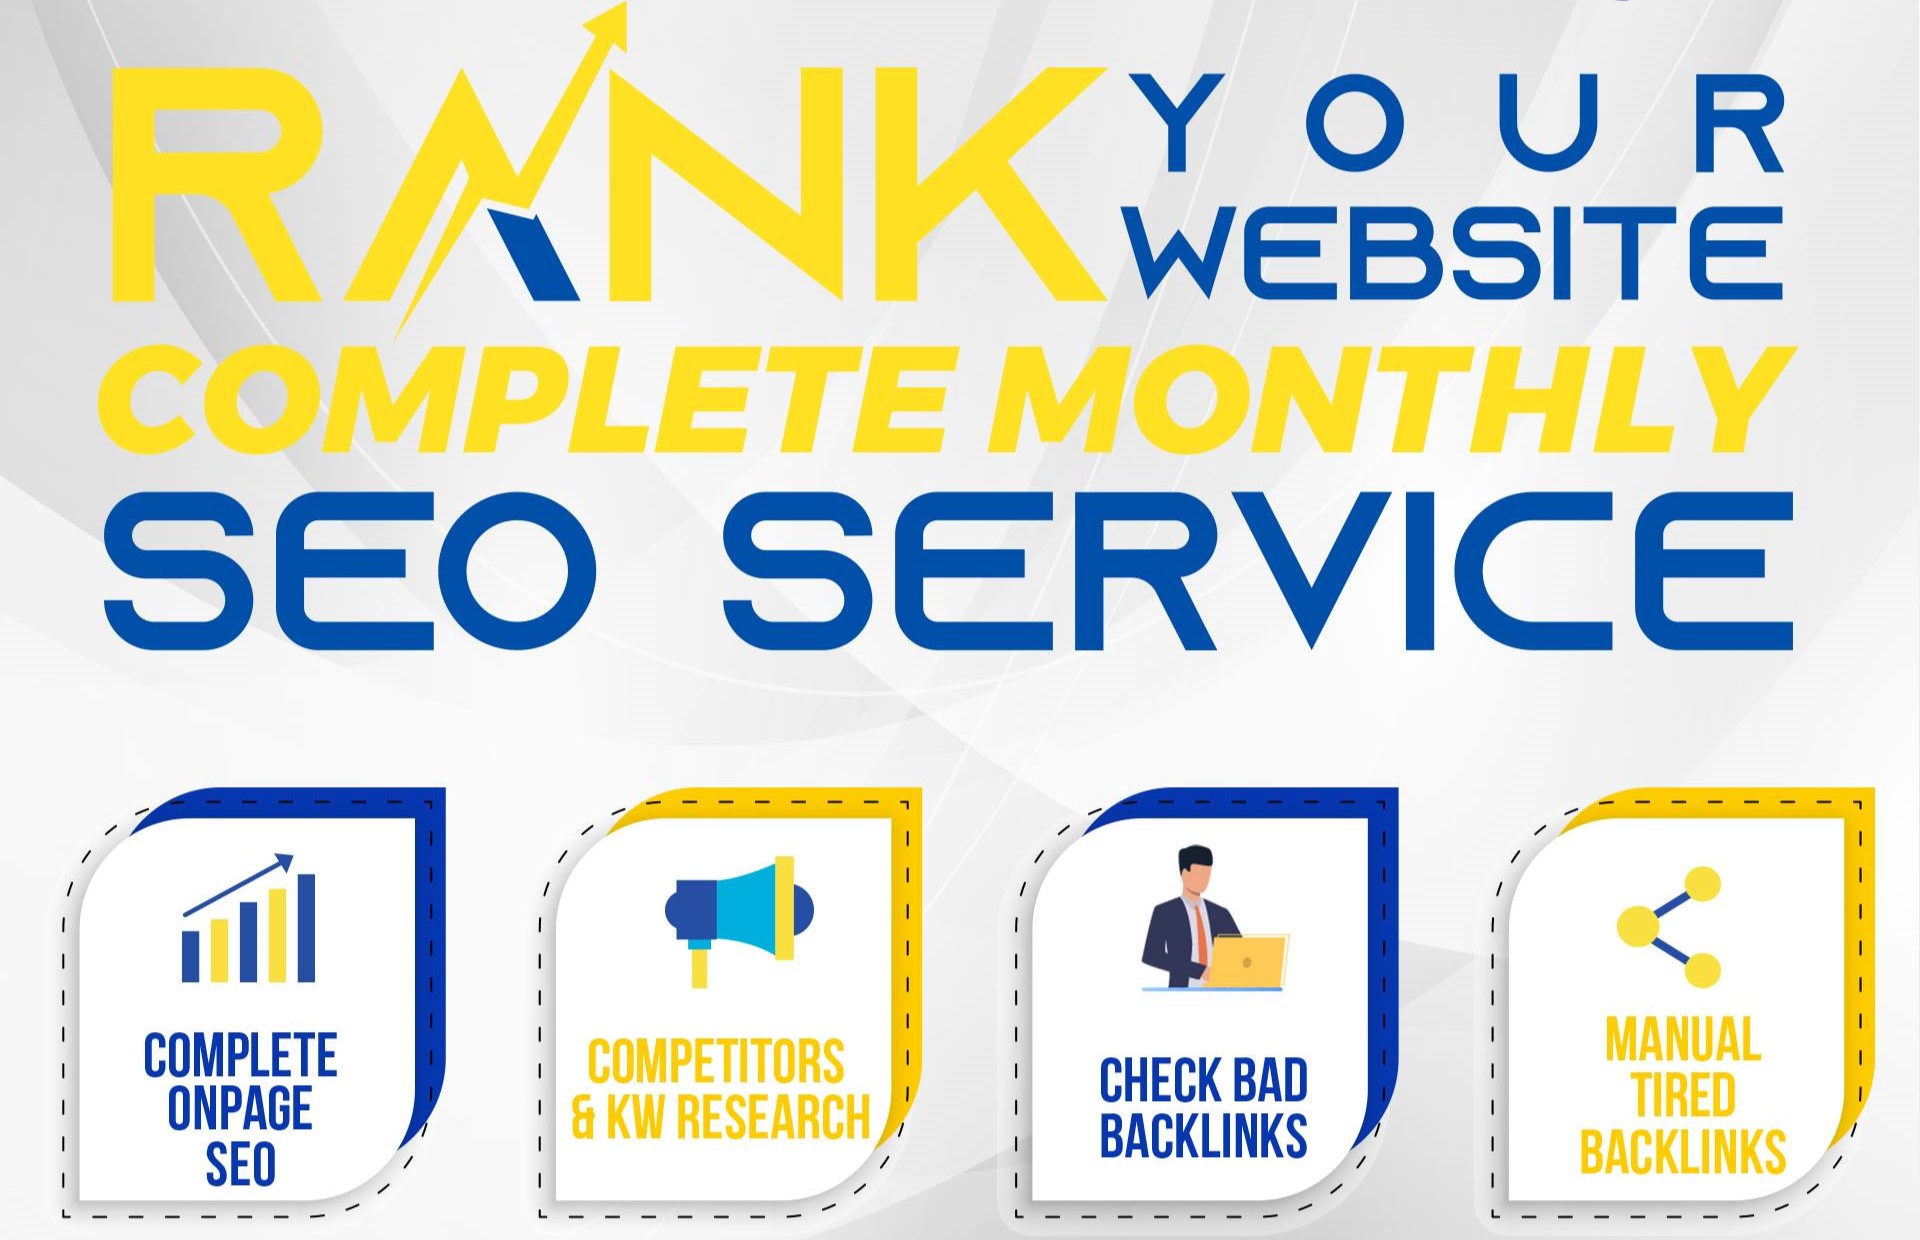 Rank Your Website with Complete Monthly SEO Service